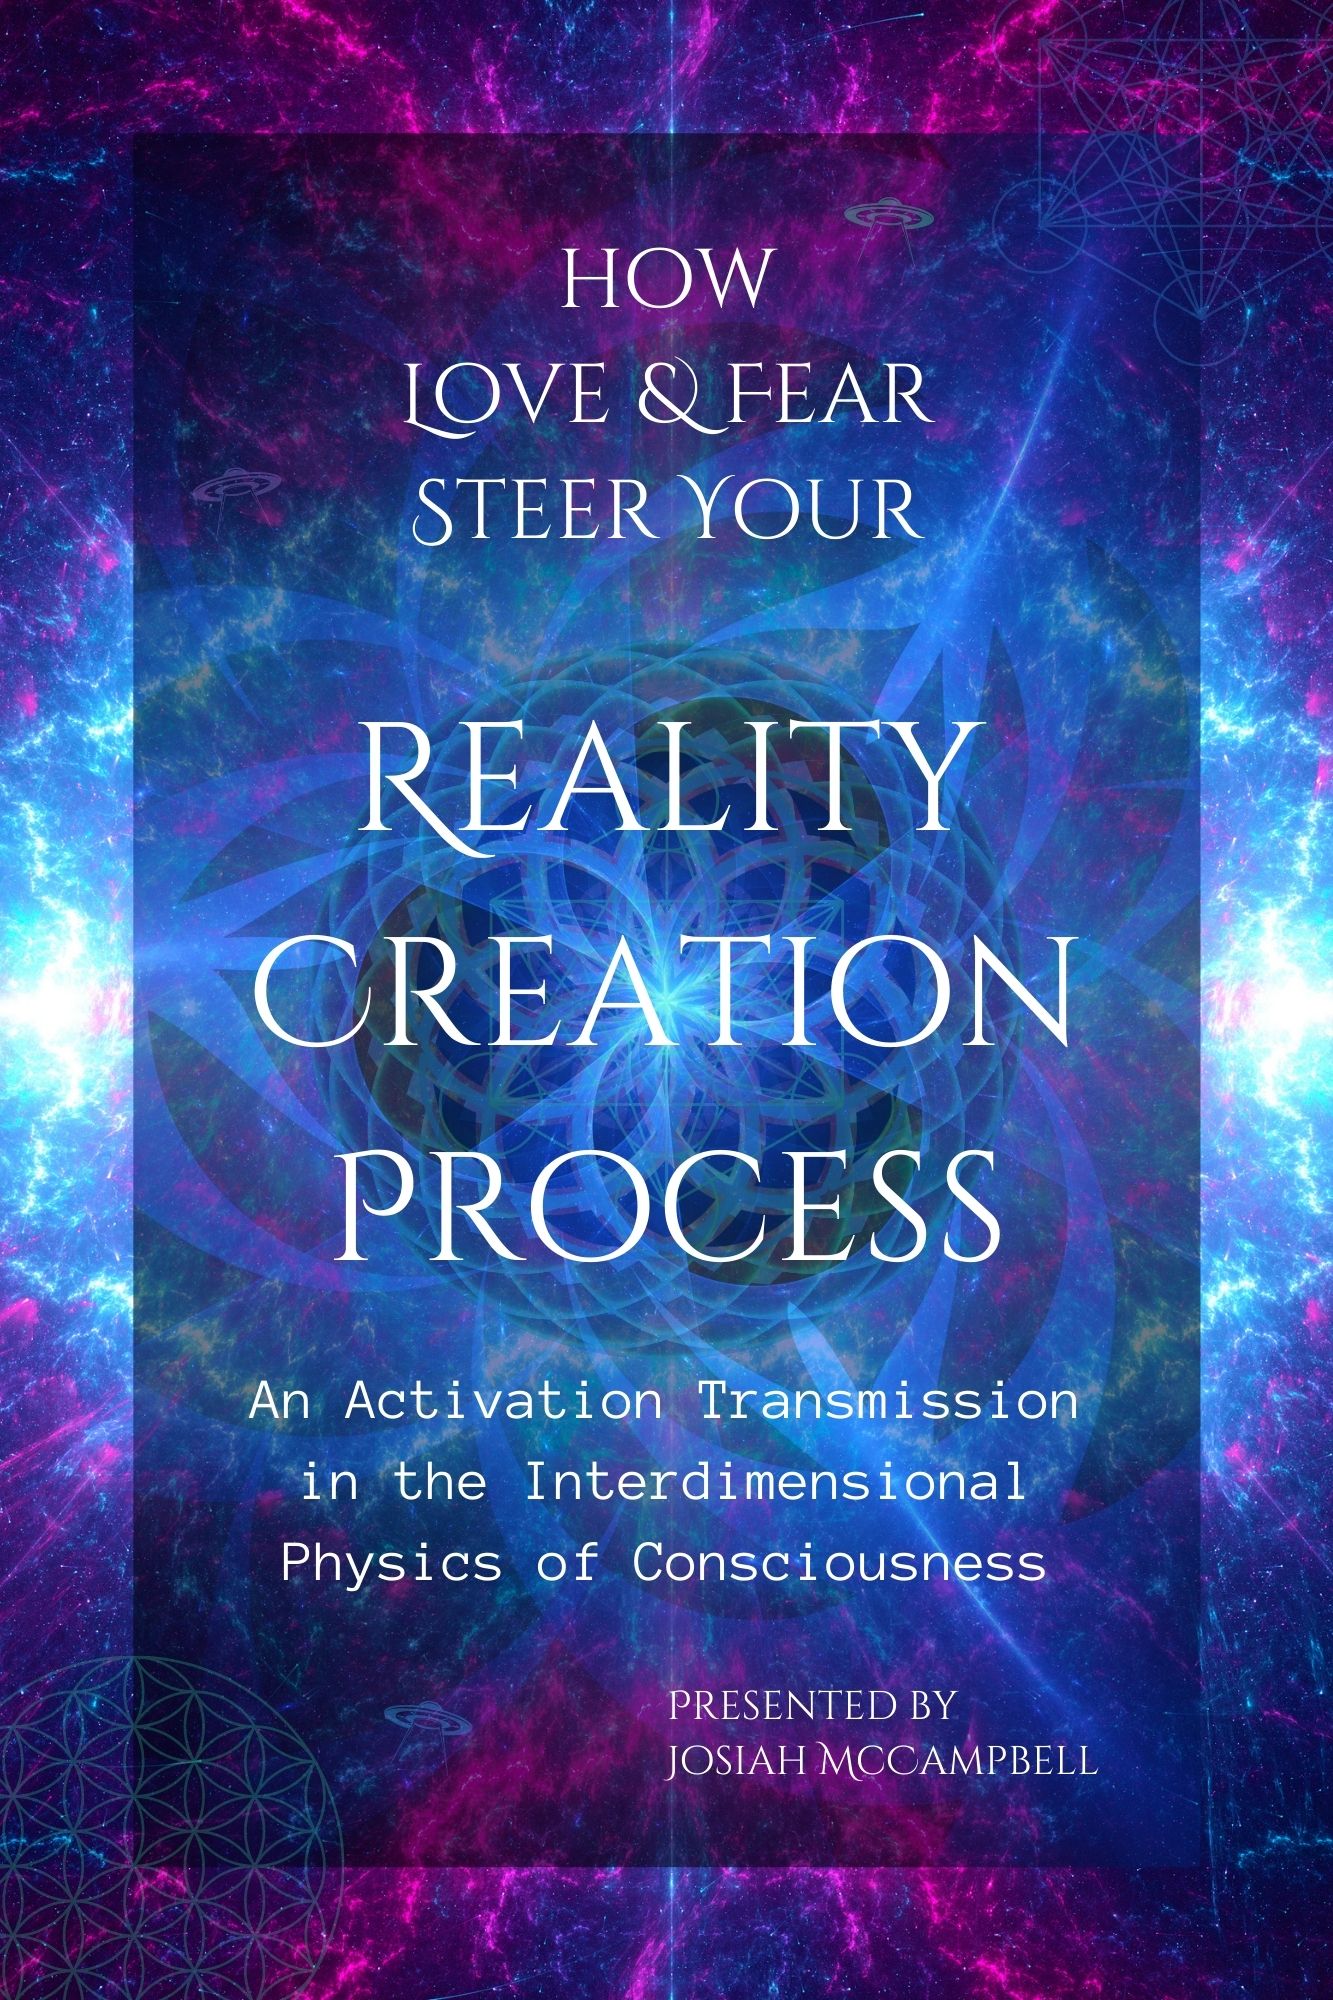 Image of the cover of my book, "How Love & Fear Steer Your Reality Creation Process - An Activation Transmission in the Interdimensional Physics of Consiousness"